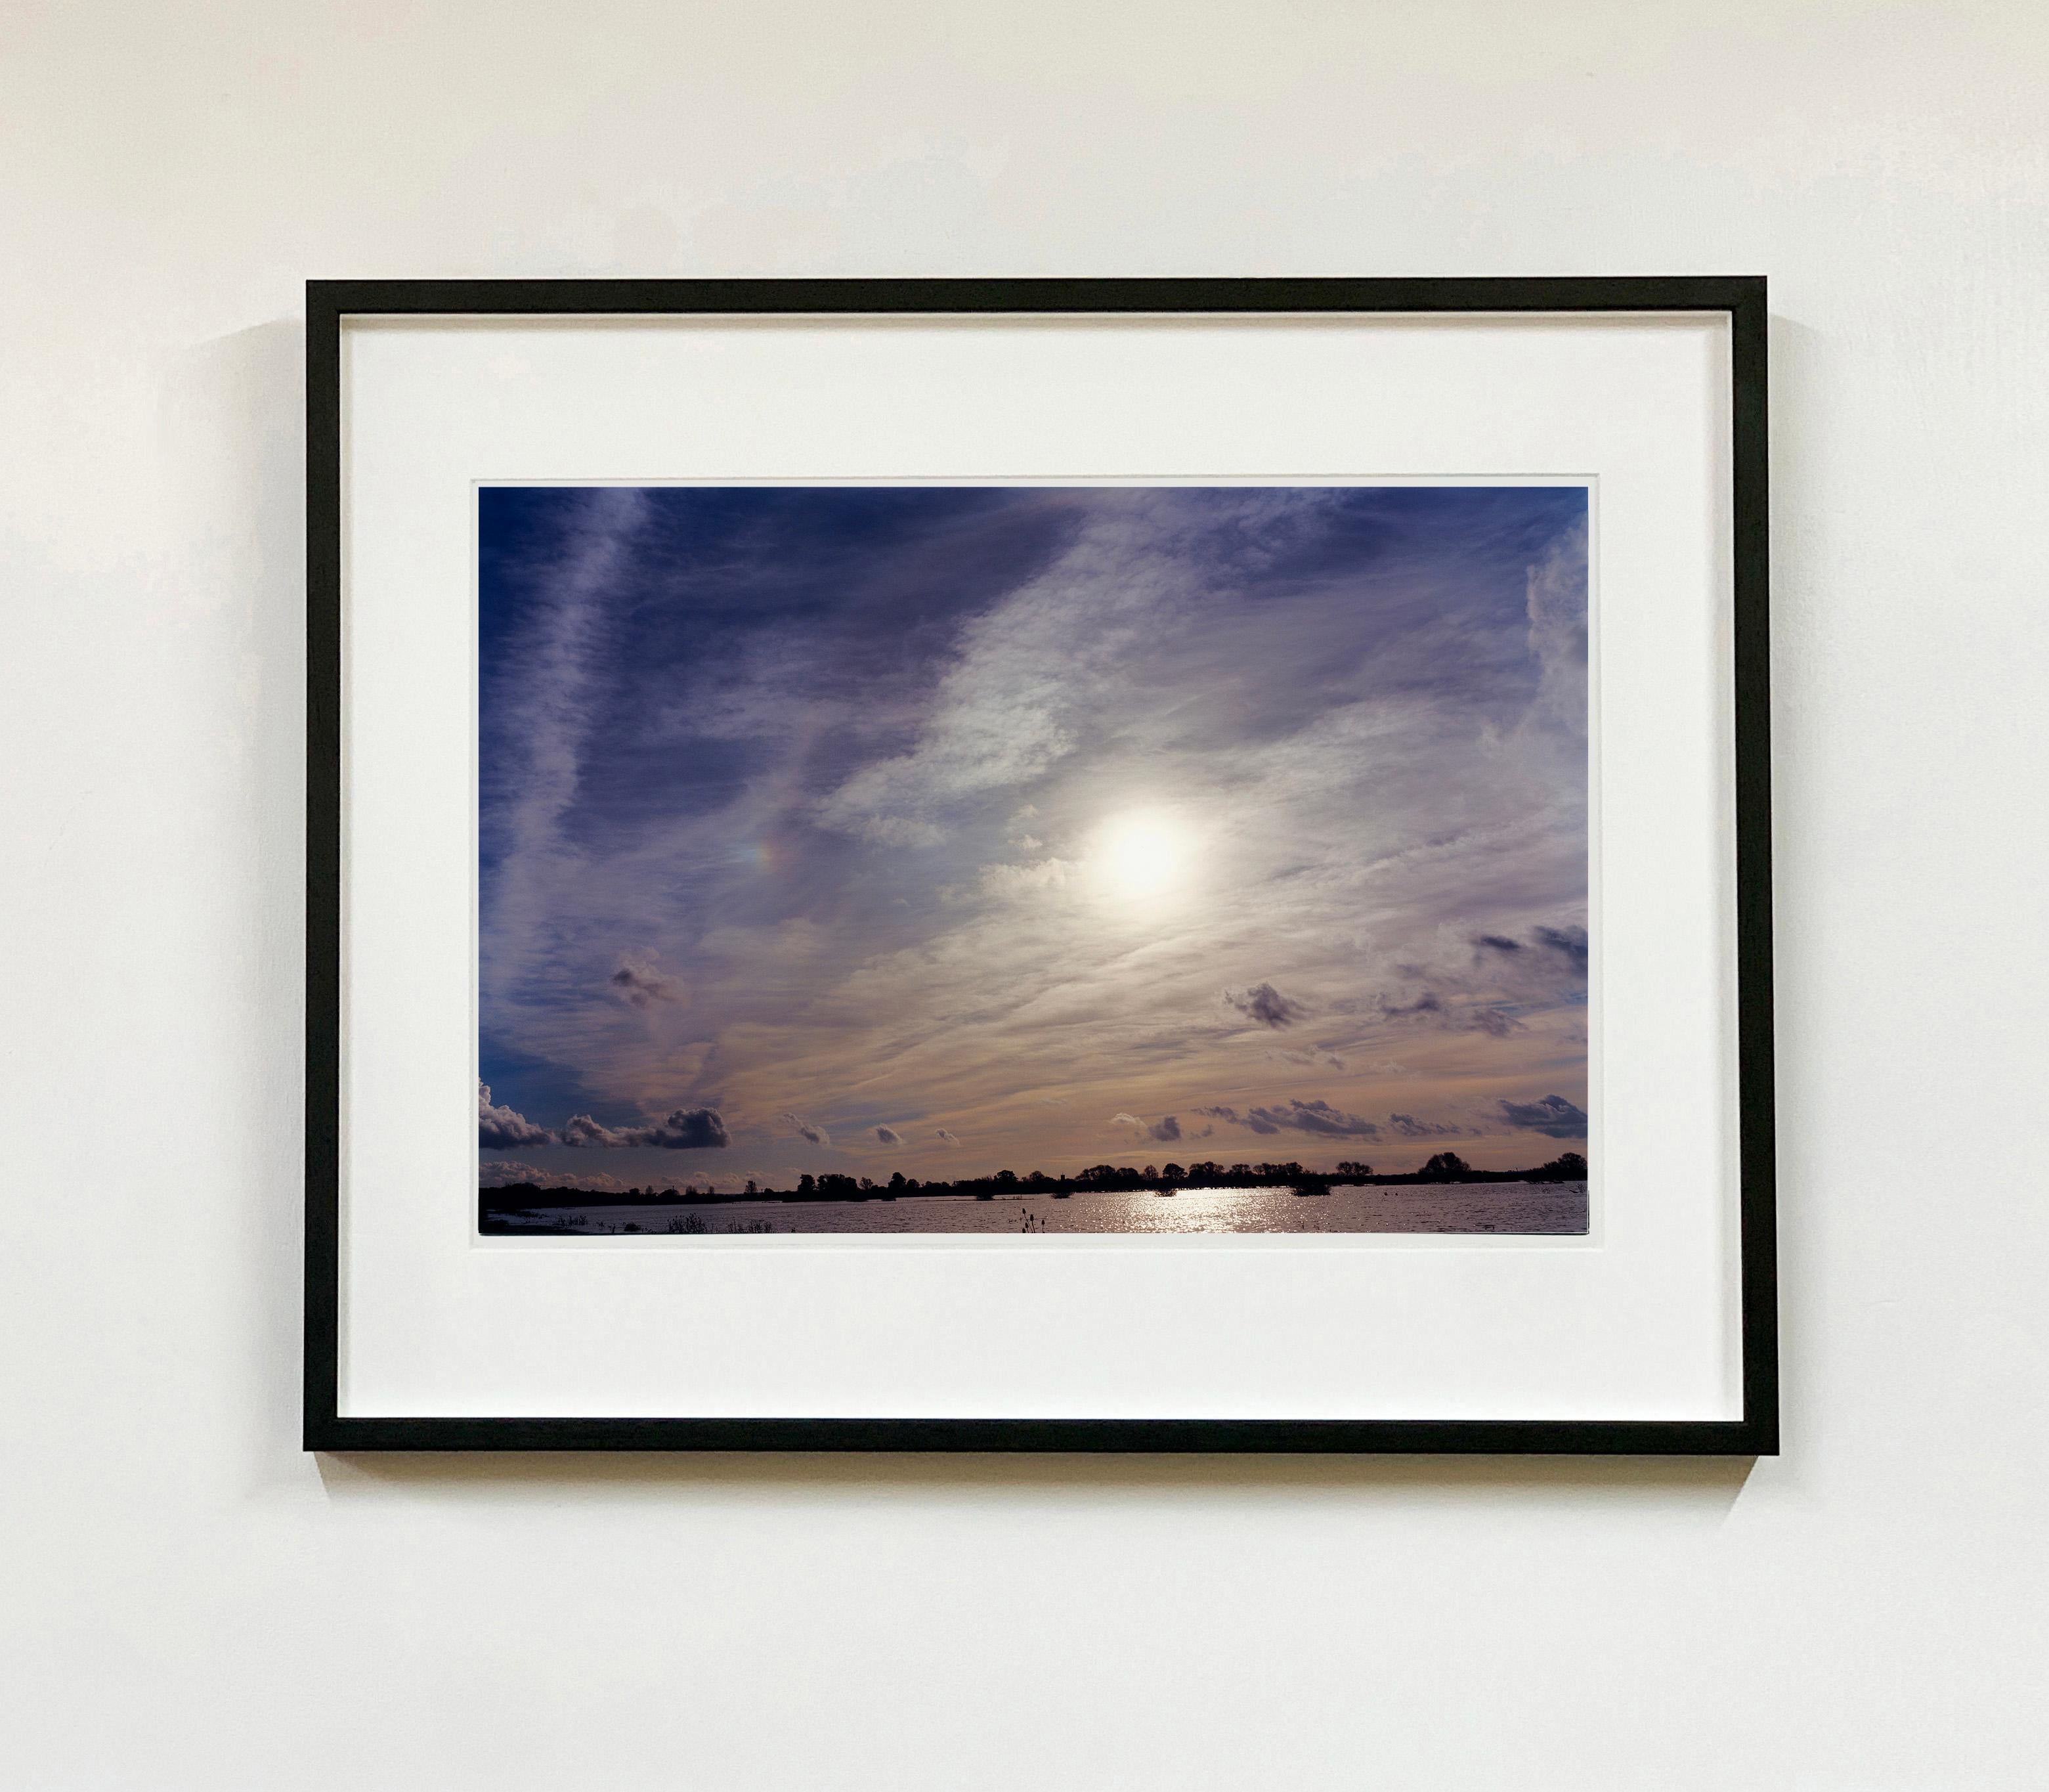 Mare Fen, British landscape photograph from Richard Heeps series, 36 Minutes in Cambridgeshire. 
Richard Heeps was awarded a Millennium Year of the Artist Arts Council Grant to make this work. This project was born from an idea to produce a set of